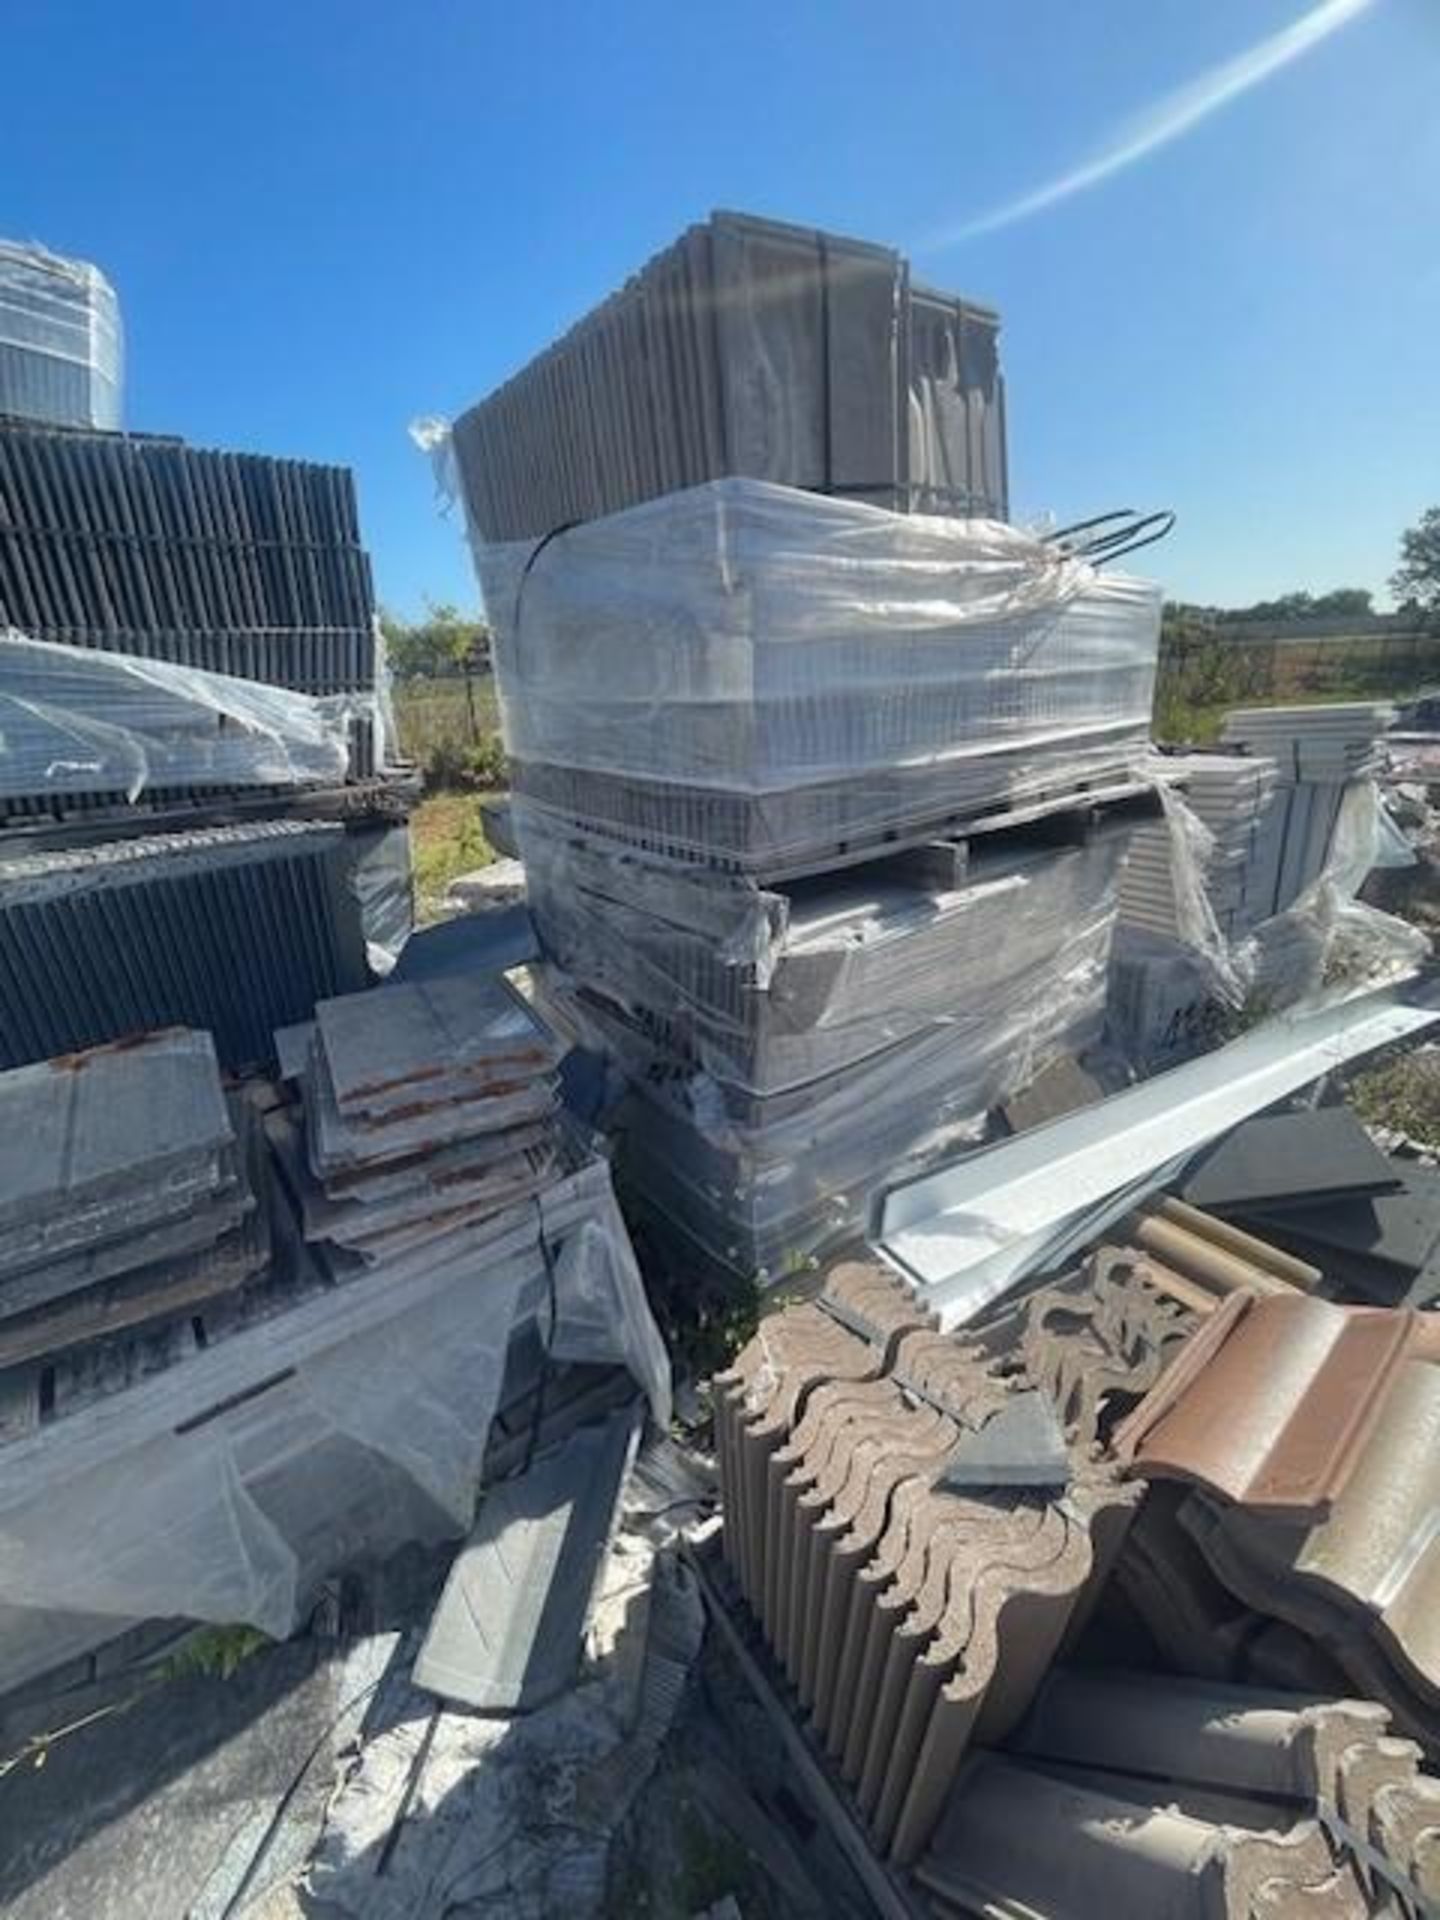 LOT: Assorted Roofing Tiles